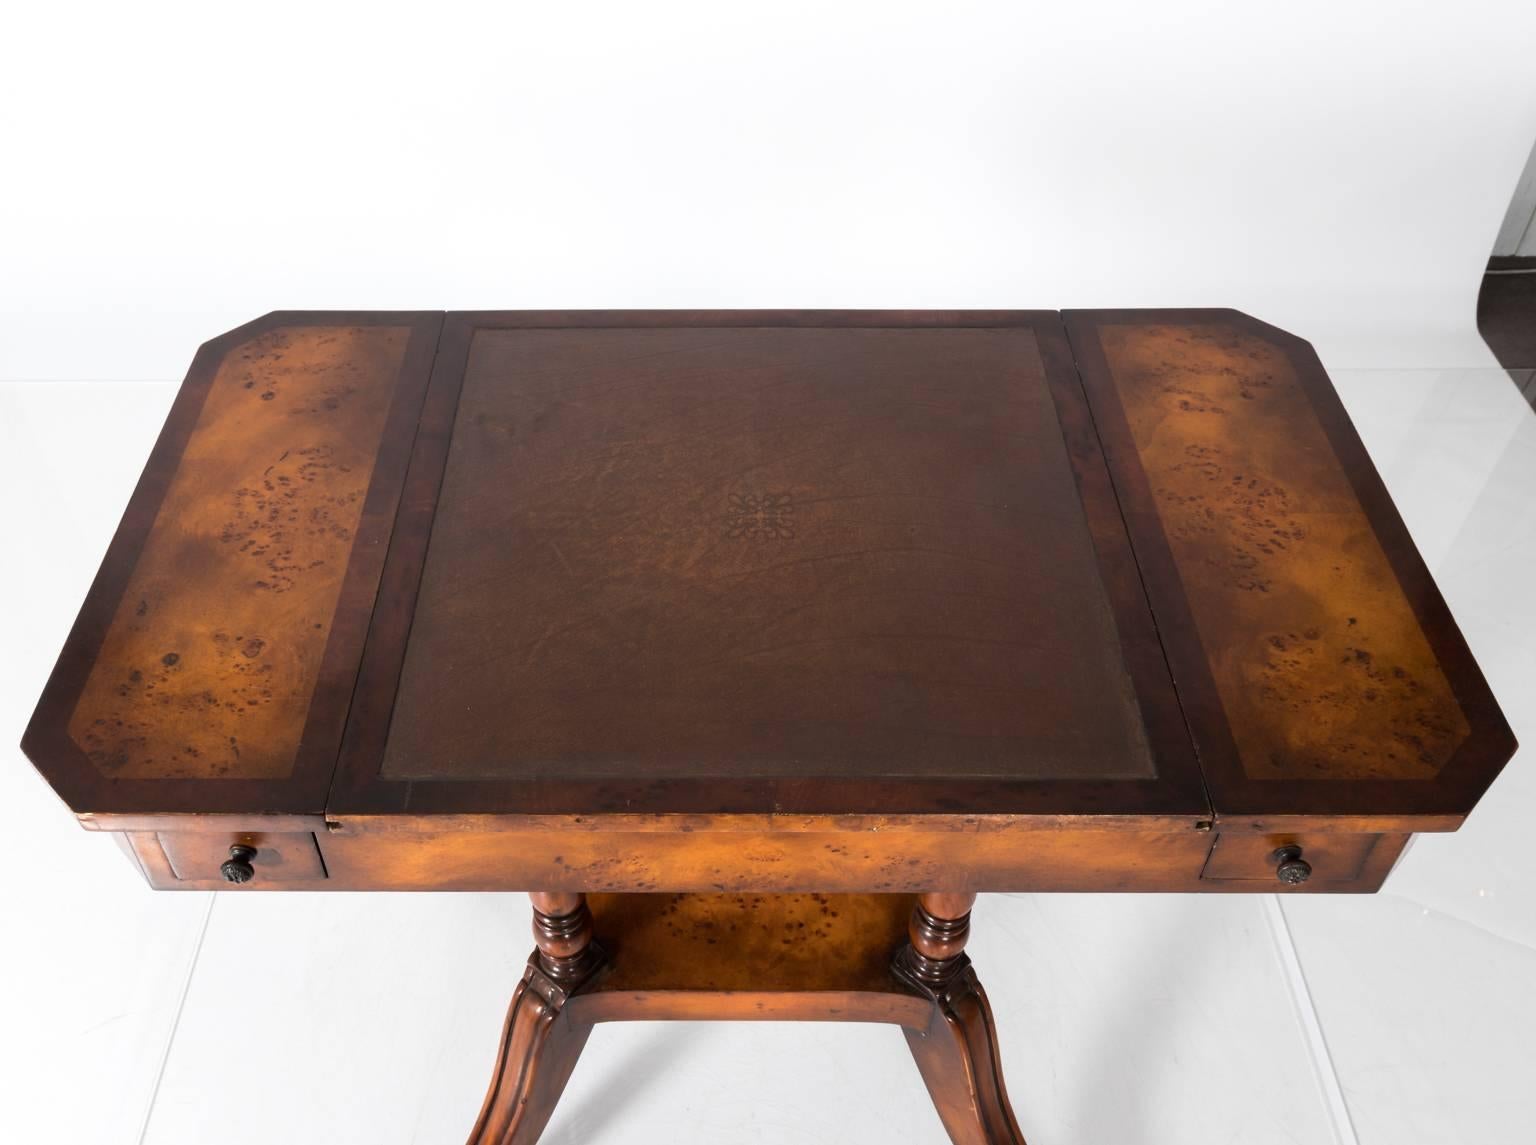 Four-drawer wooden game table that converts to a leather writing desk, circa 1940.
